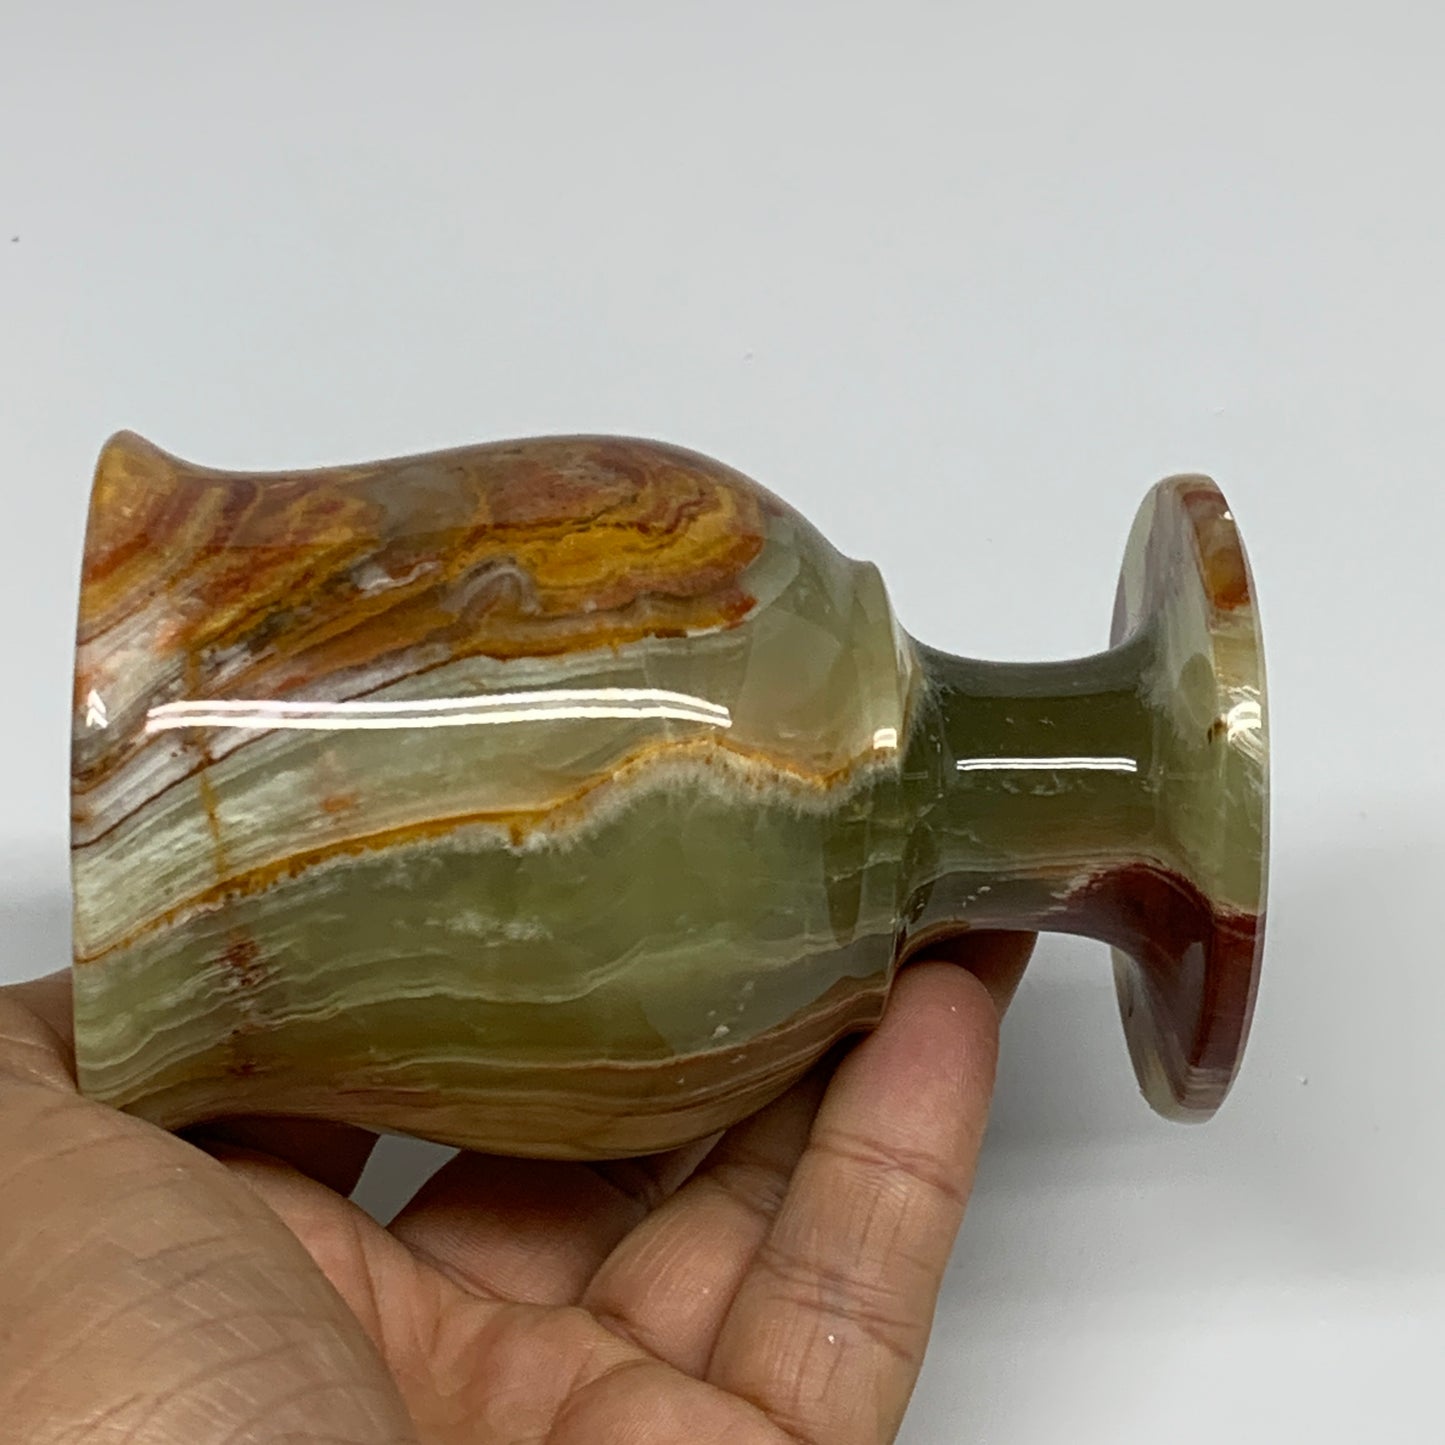 253g, 3.8"x2.5" Natural Green Onyx Cup Gemstone from Afghanistan, B31998